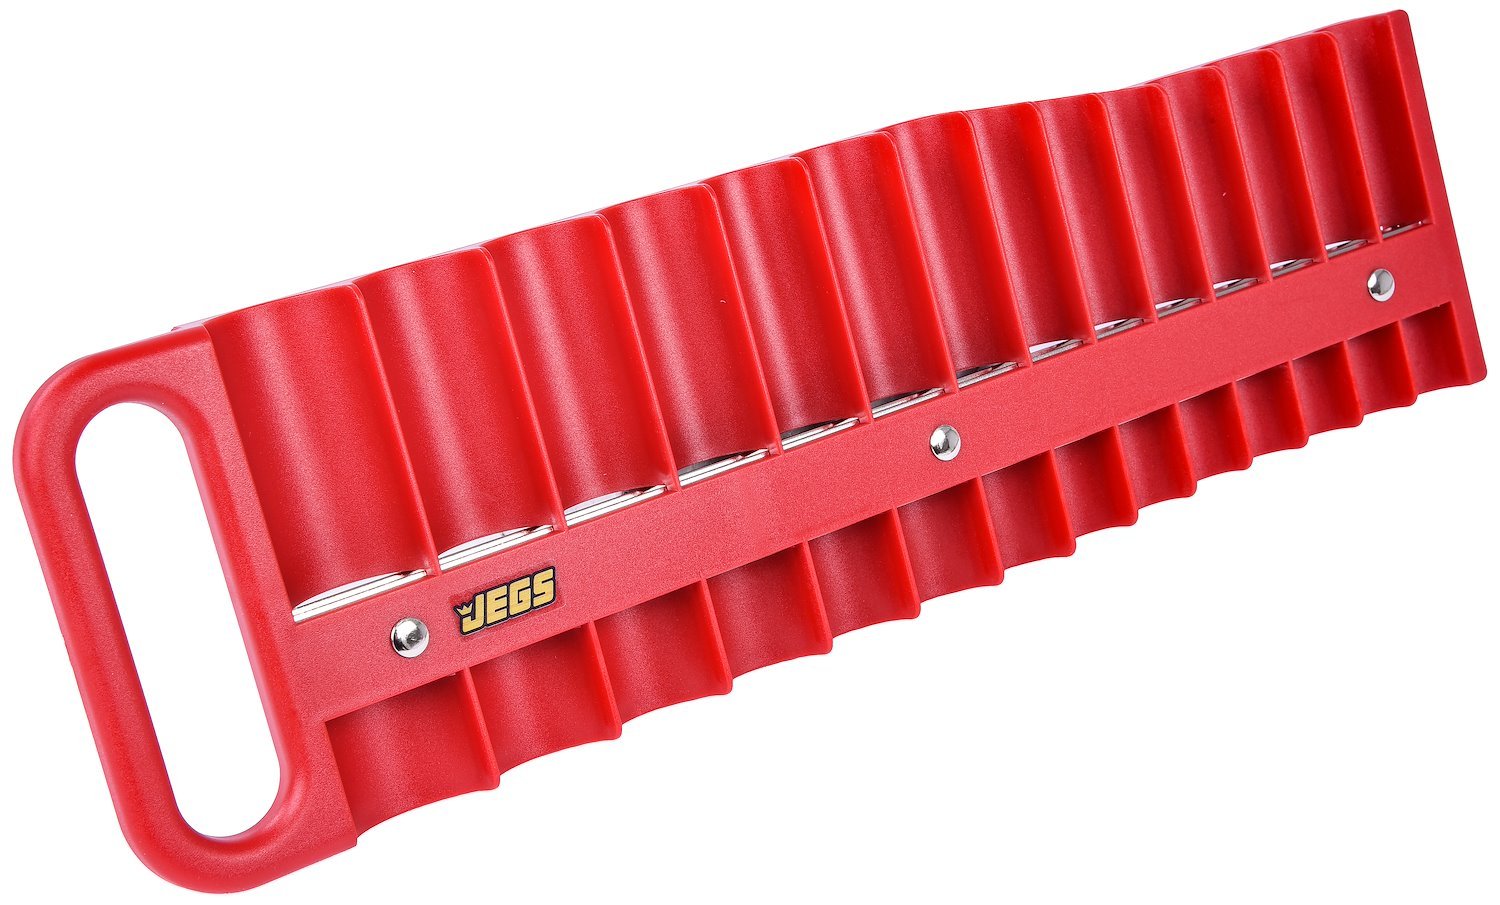 ABN Magnetic SAE 3/8 inch Drive Bit Socket Organizer Tray Red Plastic Holder